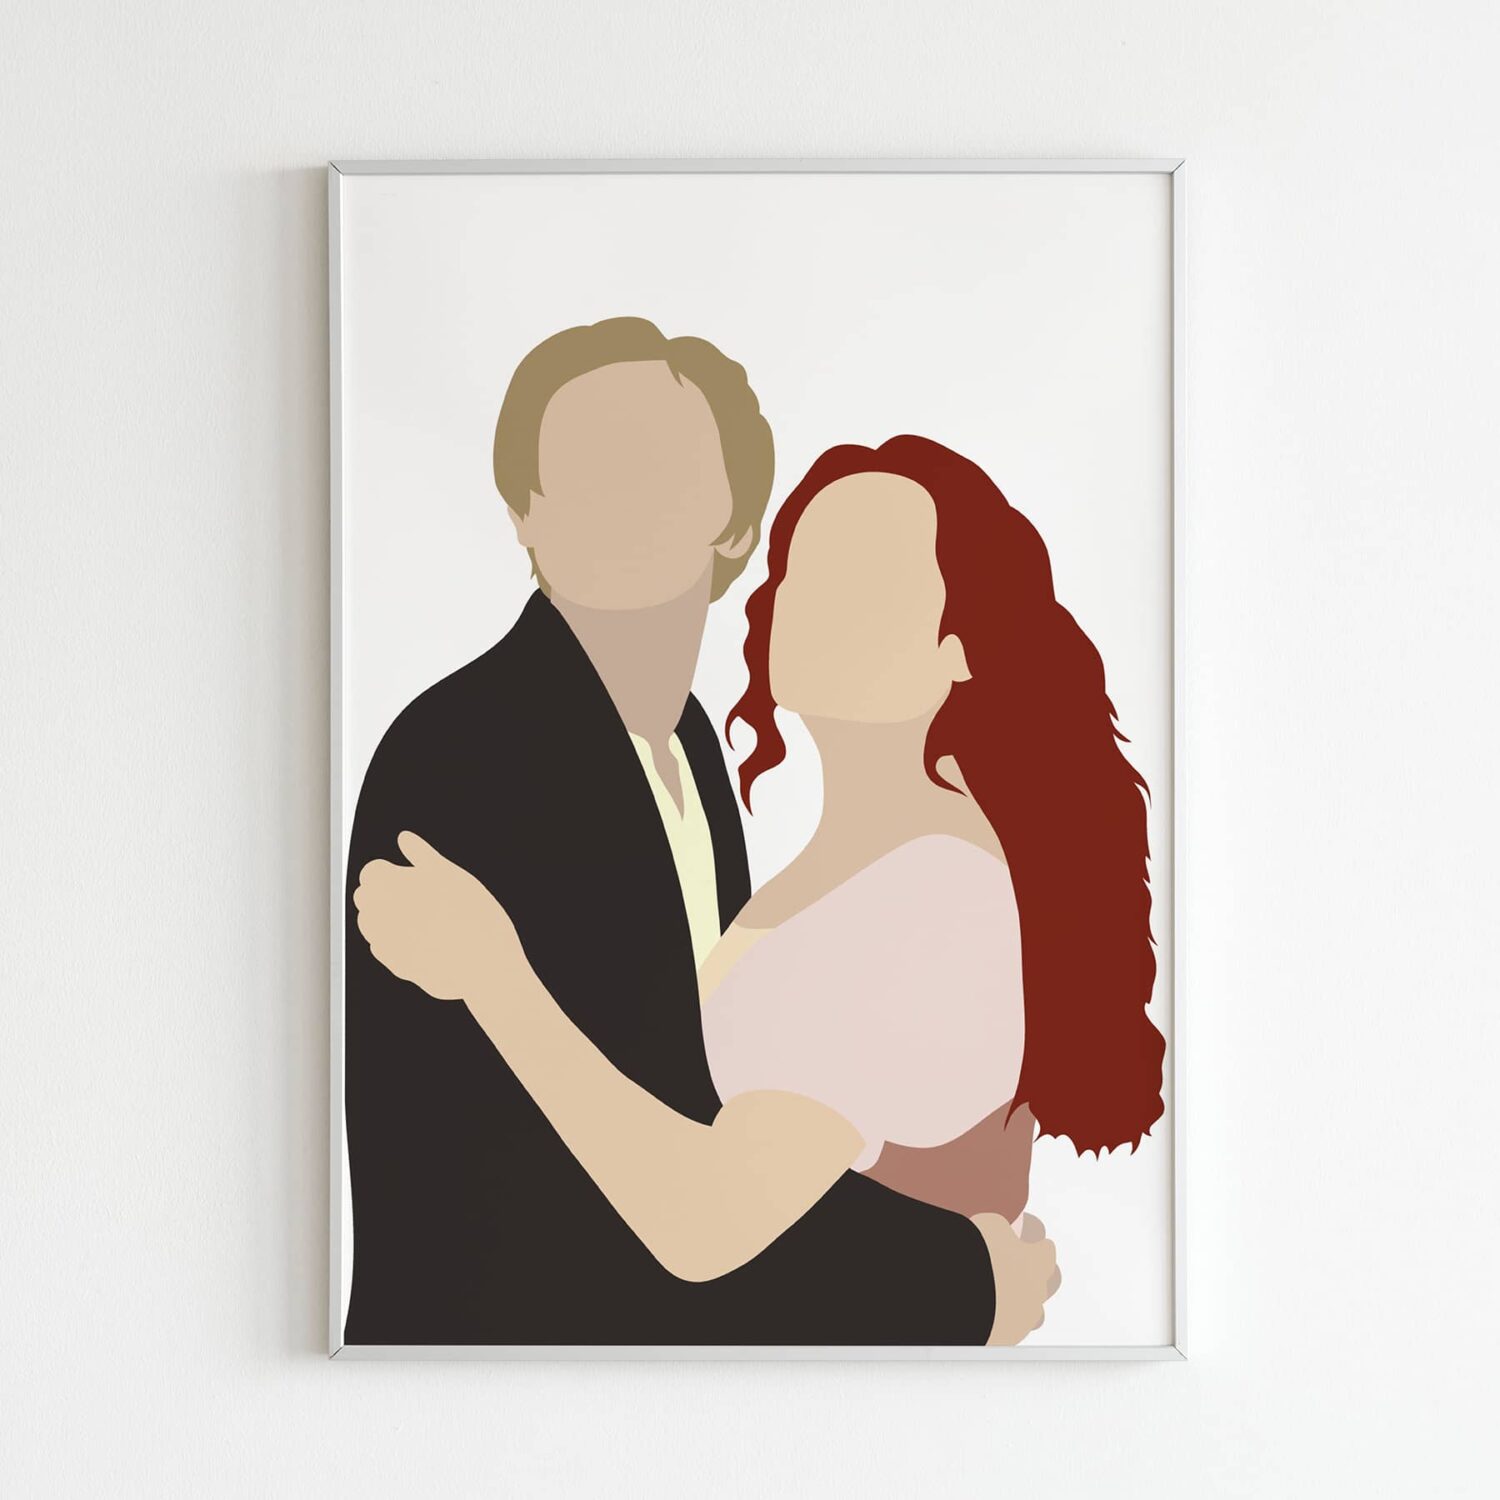 Minimalist Titanic Poster featuring illustrations of Jack and Rose, Printing in County Monaghan, Ireland by Design Gaff